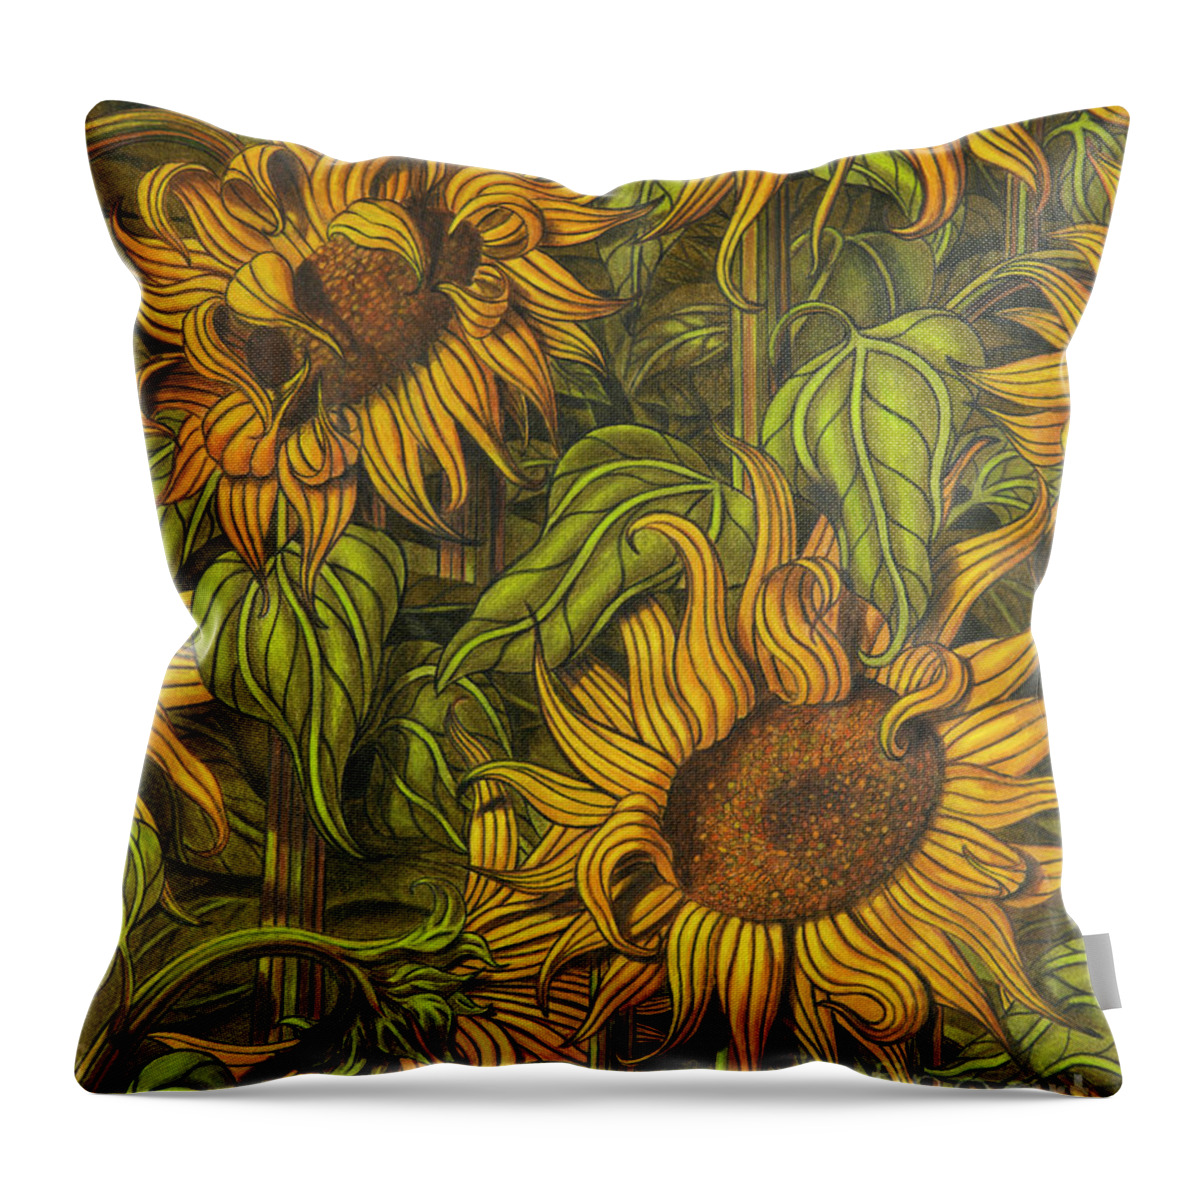 Impressionism Throw Pillow featuring the drawing Autumn Suns by Scott Brennan